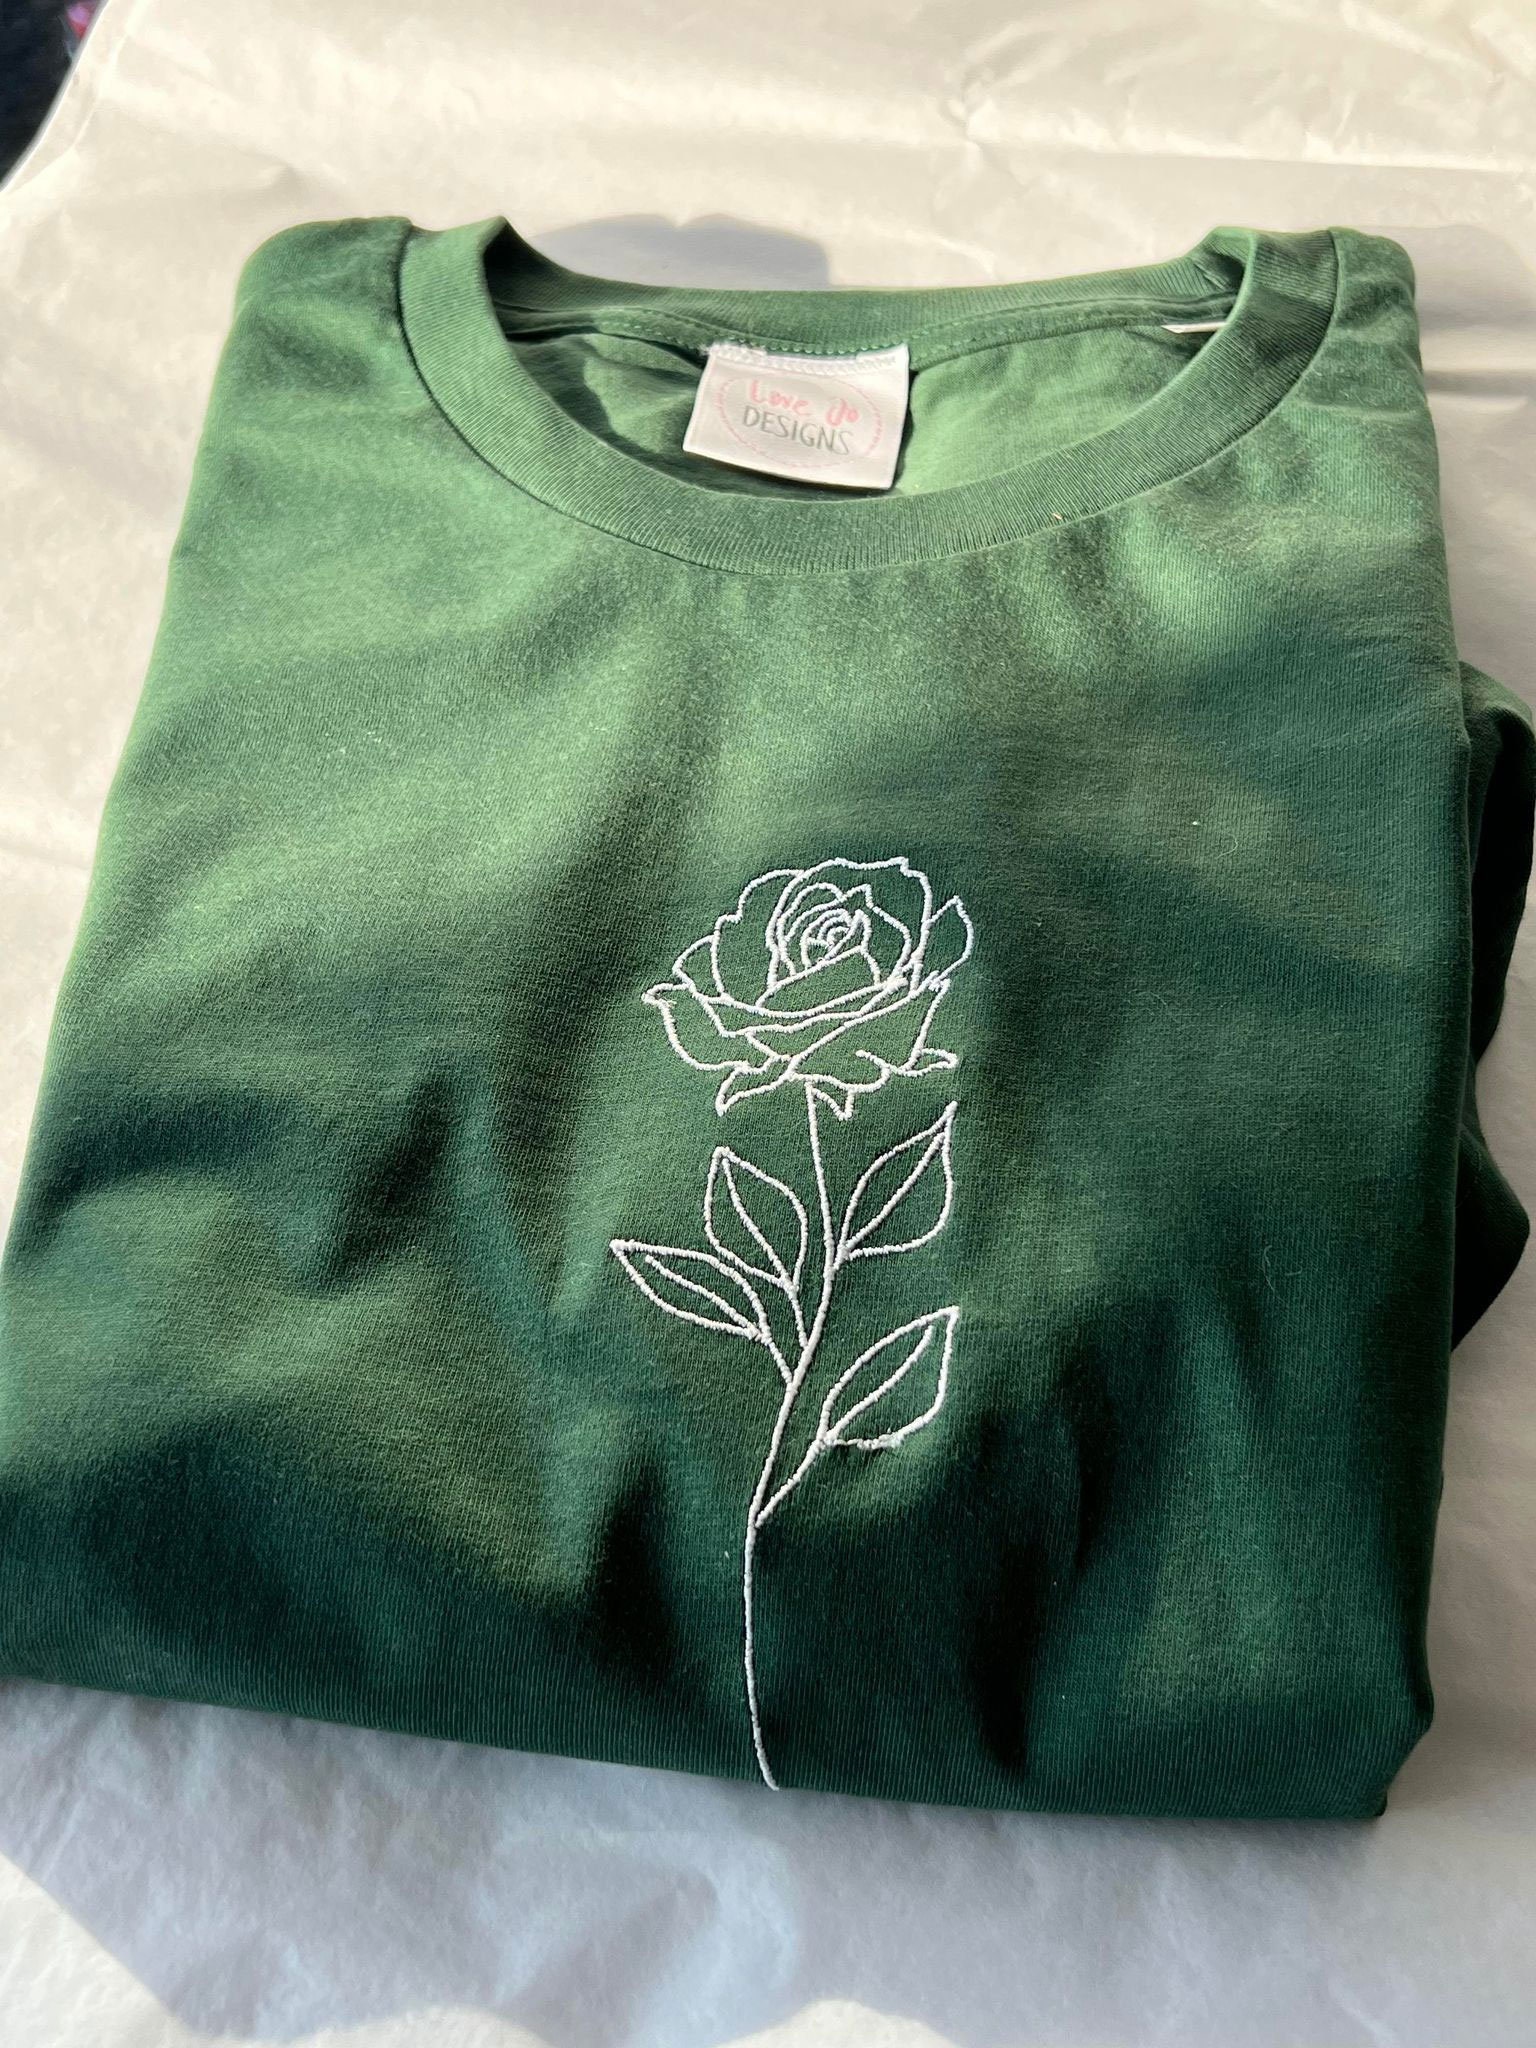 Embroidered T-shirt Rose Single Organic Hand Clothing Unique Soft Top Rose Sustainable - Designs Drawn Etsy